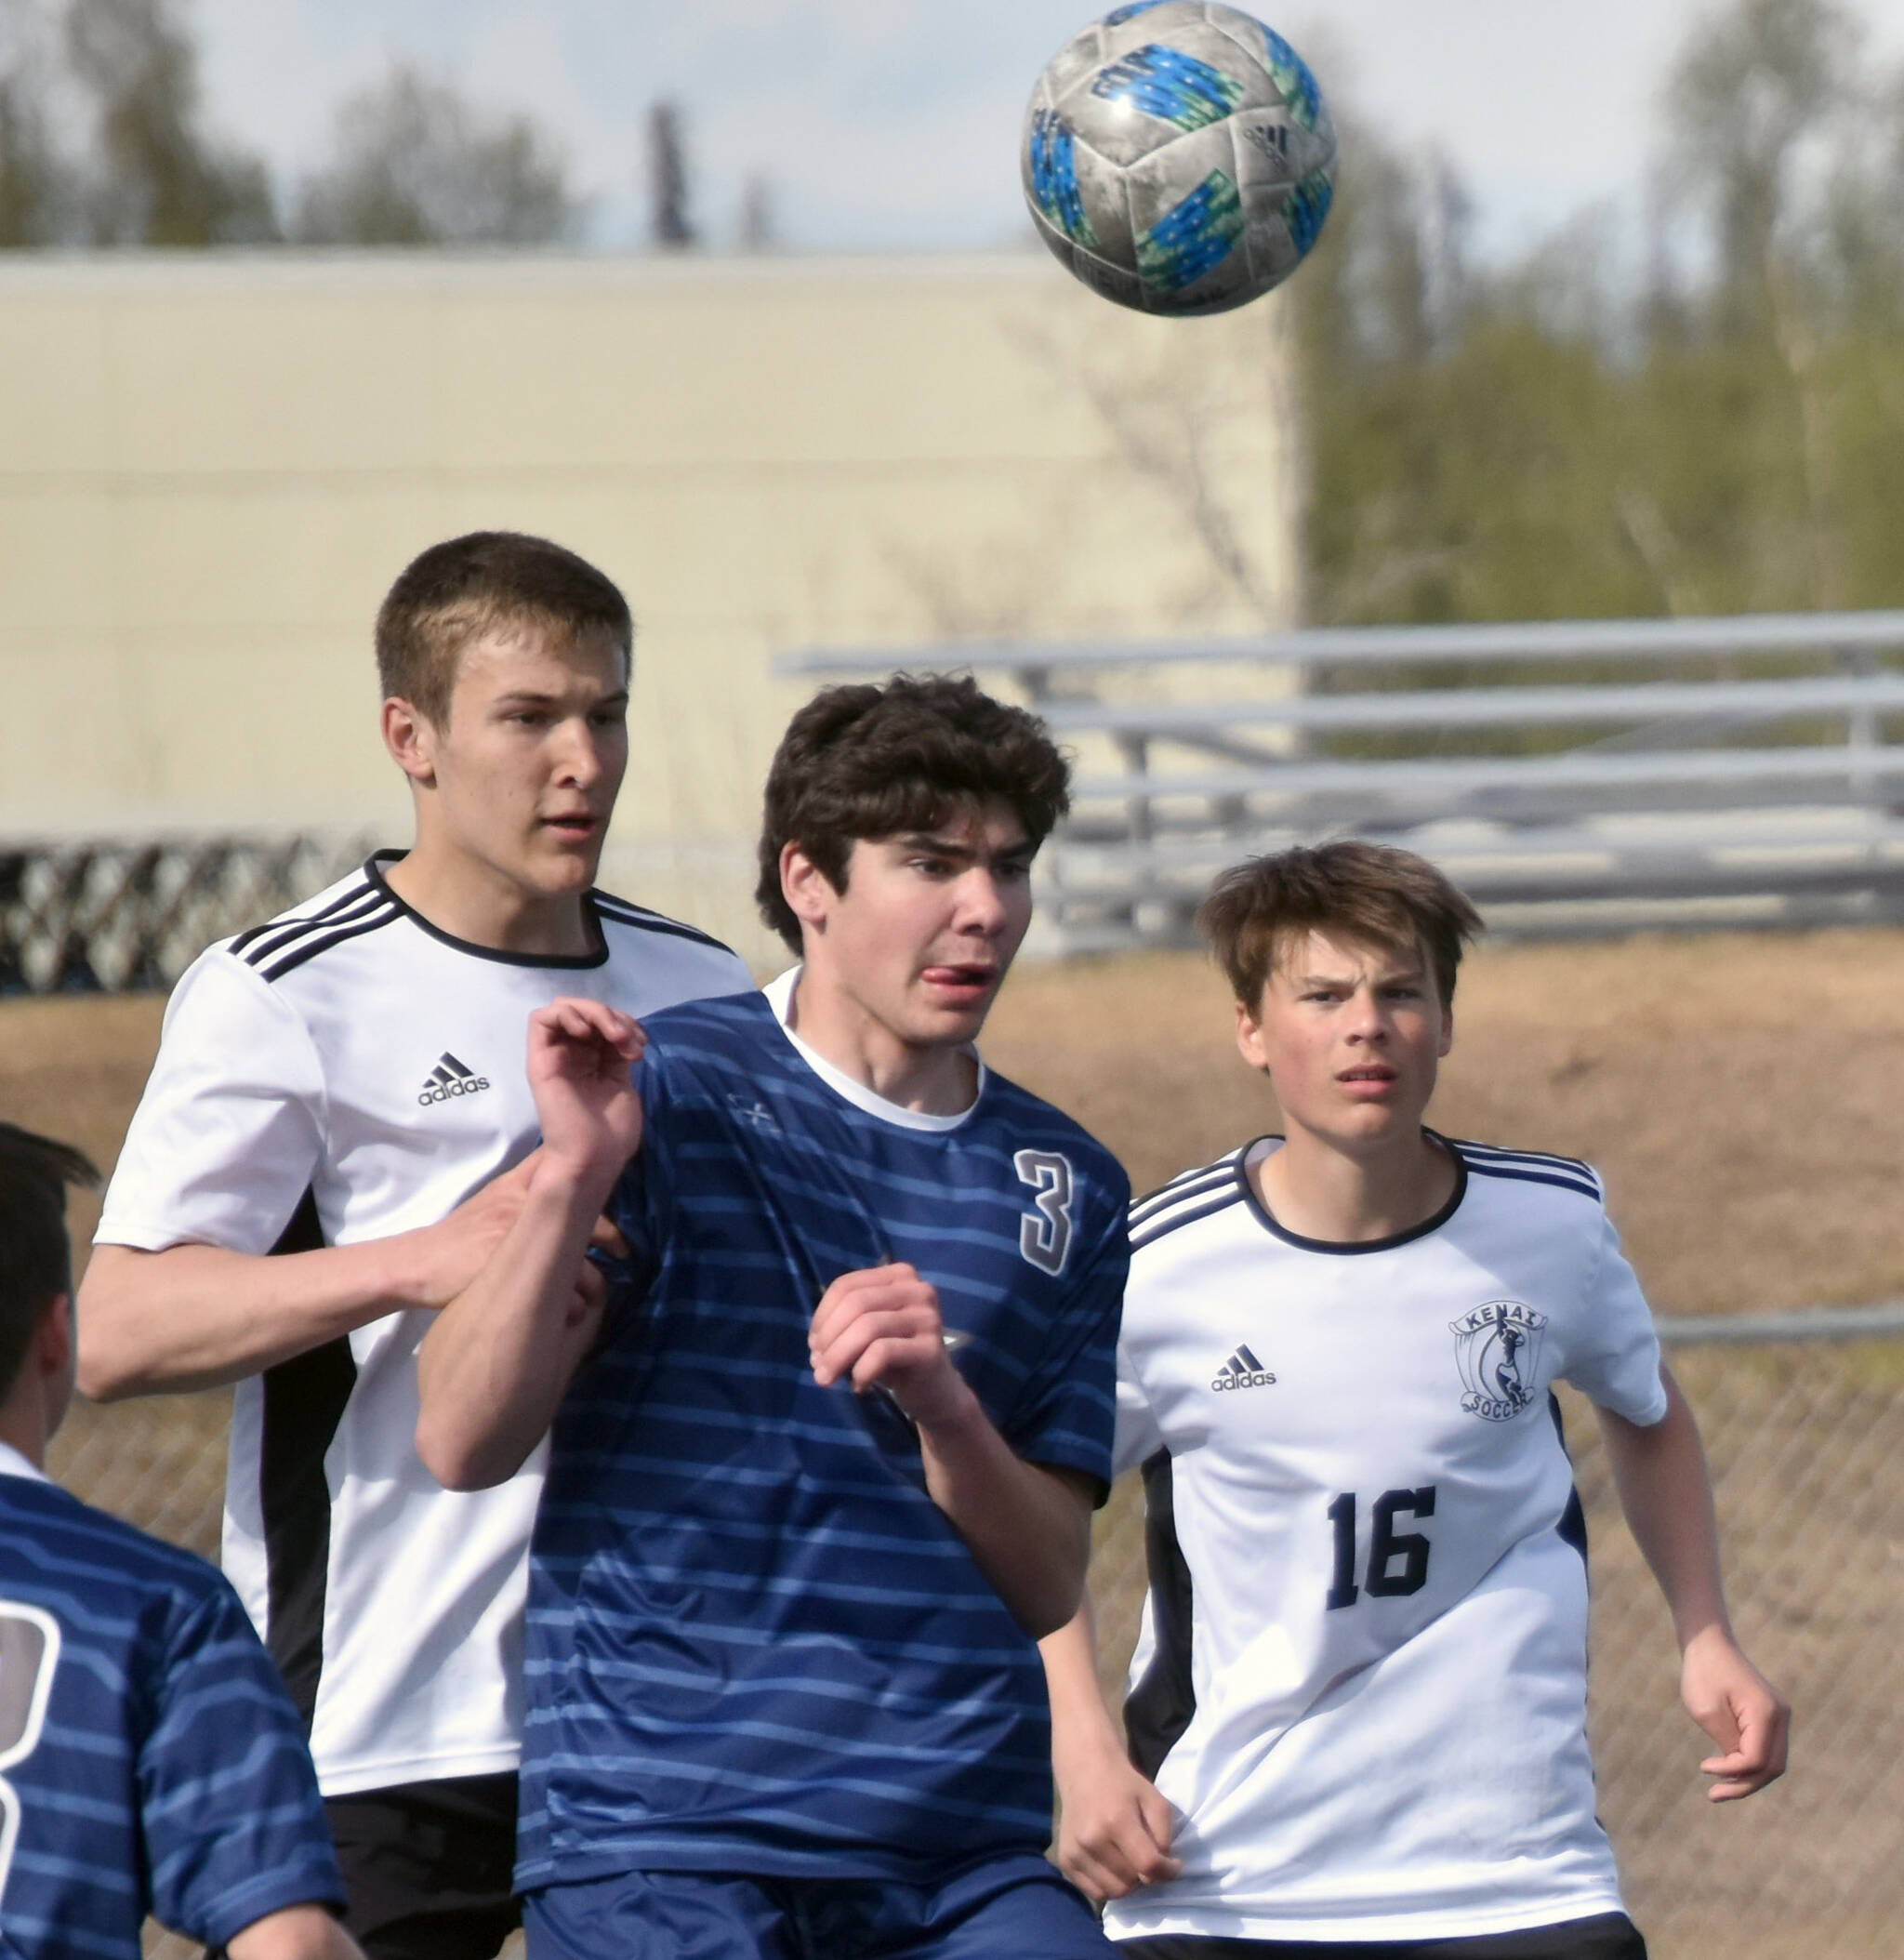 Kenai Central’s Bridger Beck and Sawyer Vann, and Soldotna’s Andrew Arthur battle for the ball Saturday, May 20, 2023, in the championship game of the Peninsula Conference tournament at Justin Maile Field at Soldotna High School in Soldotna, Alaska. (Photo by Jeff Helminiak/Peninsula Clarion)